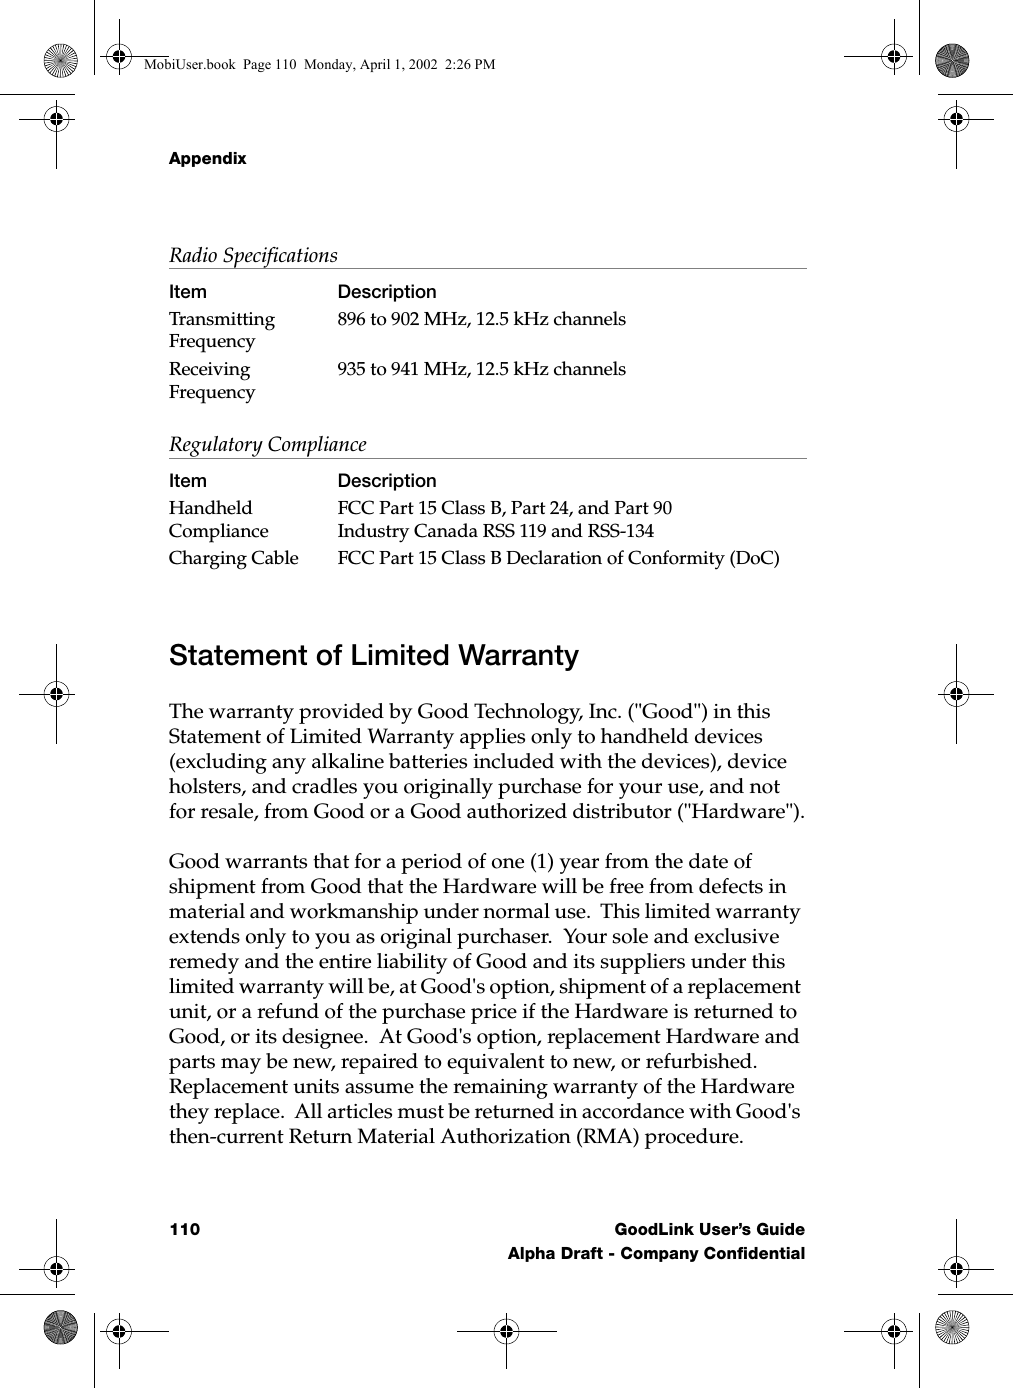 Appendix110 GoodLink User’s GuideAlpha Draft - Company ConfidentialStatement of Limited WarrantyThe warranty provided by Good Technology, Inc. (&quot;Good&quot;) in this Statement of Limited Warranty applies only to handheld devices (excluding any alkaline batteries included with the devices), device holsters, and cradles you originally purchase for your use, and not for resale, from Good or a Good authorized distributor (&quot;Hardware&quot;).Good warrants that for a period of one (1) year from the date of shipment from Good that the Hardware will be free from defects in material and workmanship under normal use.  This limited warranty extends only to you as original purchaser.  Your sole and exclusive remedy and the entire liability of Good and its suppliers under this limited warranty will be, at Good&apos;s option, shipment of a replacement unit, or a refund of the purchase price if the Hardware is returned to Good, or its designee.  At Good&apos;s option, replacement Hardware and parts may be new, repaired to equivalent to new, or refurbished.  Replacement units assume the remaining warranty of the Hardware they replace.  All articles must be returned in accordance with Good&apos;s then-current Return Material Authorization (RMA) procedure.Transmitting Frequency896 to 902 MHz, 12.5 kHz channelsReceiving Frequency935 to 941 MHz, 12.5 kHz channelsRegulatory ComplianceItem DescriptionHandheld ComplianceFCC Part 15 Class B, Part 24, and Part 90Industry Canada RSS 119 and RSS-134Charging Cable FCC Part 15 Class B Declaration of Conformity (DoC)Radio SpecificationsItem DescriptionMobiUser.book  Page 110  Monday, April 1, 2002  2:26 PM